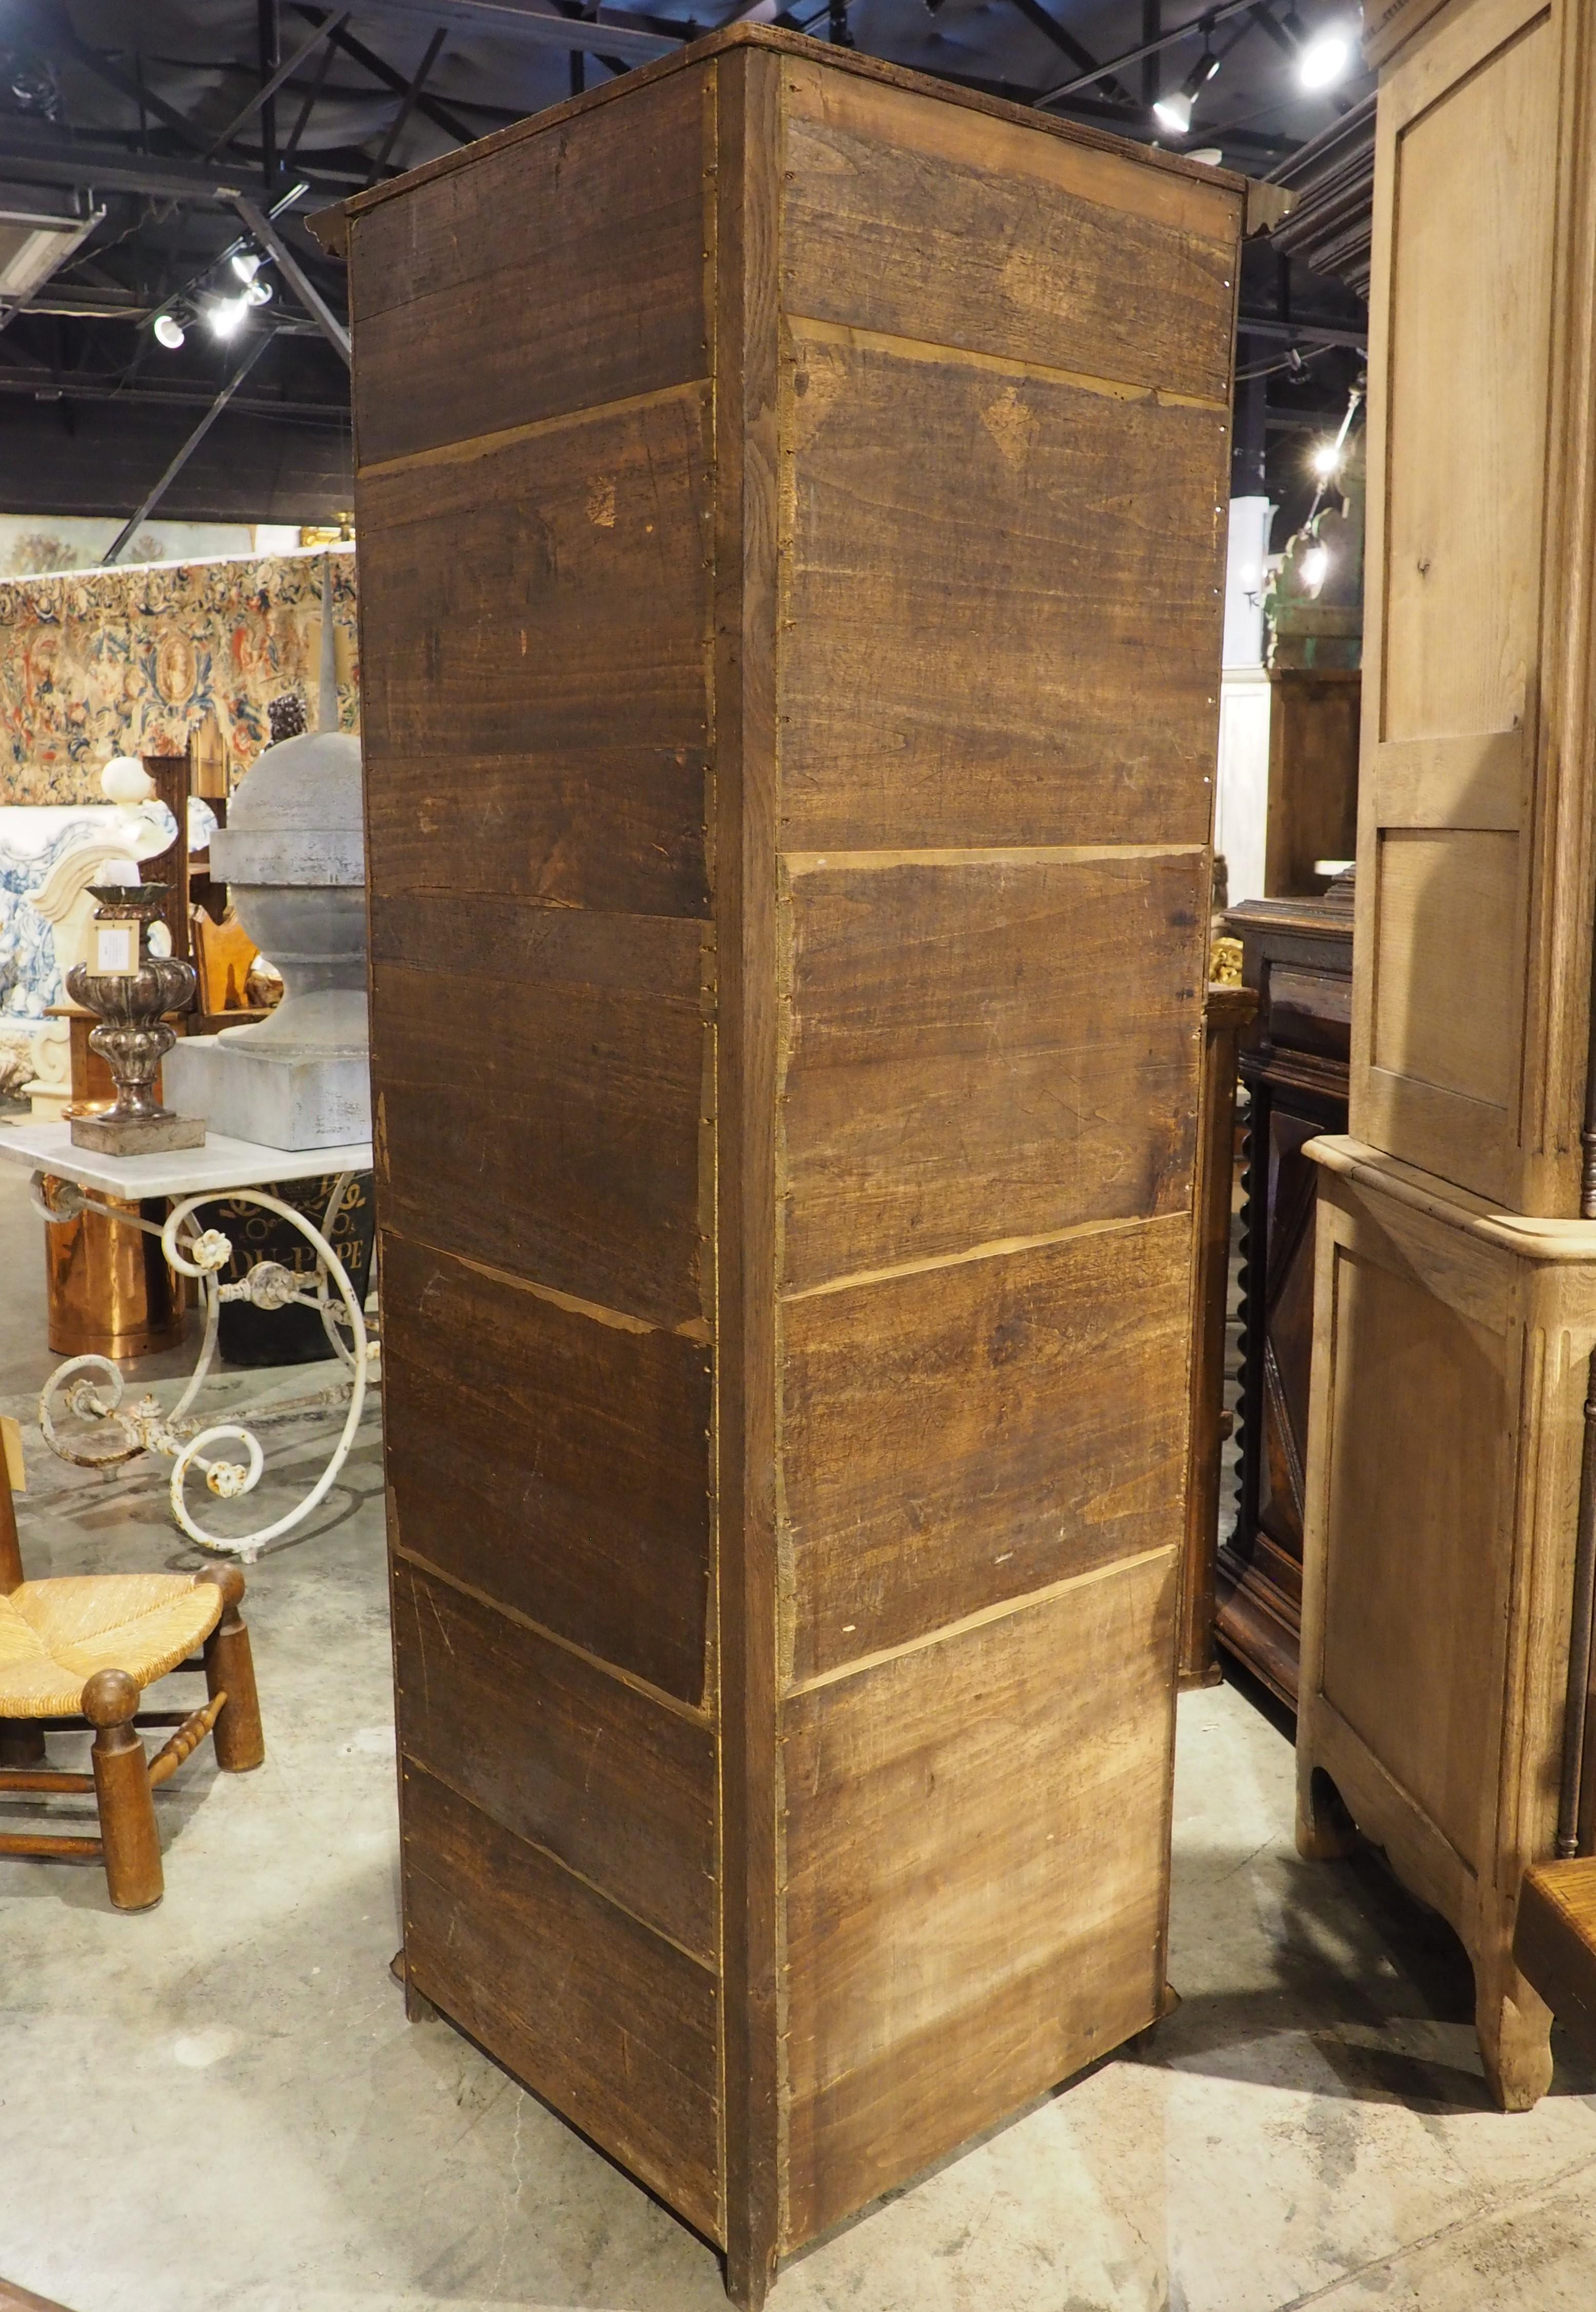 Designed to maximize efficiency without sacrificing floor space, this oak corner cabinet was hand-carved in France, circa 1885. The form is reminiscent of a bonnetiere, which is a single-door wardrobe (smaller than an armoire) that first appeared